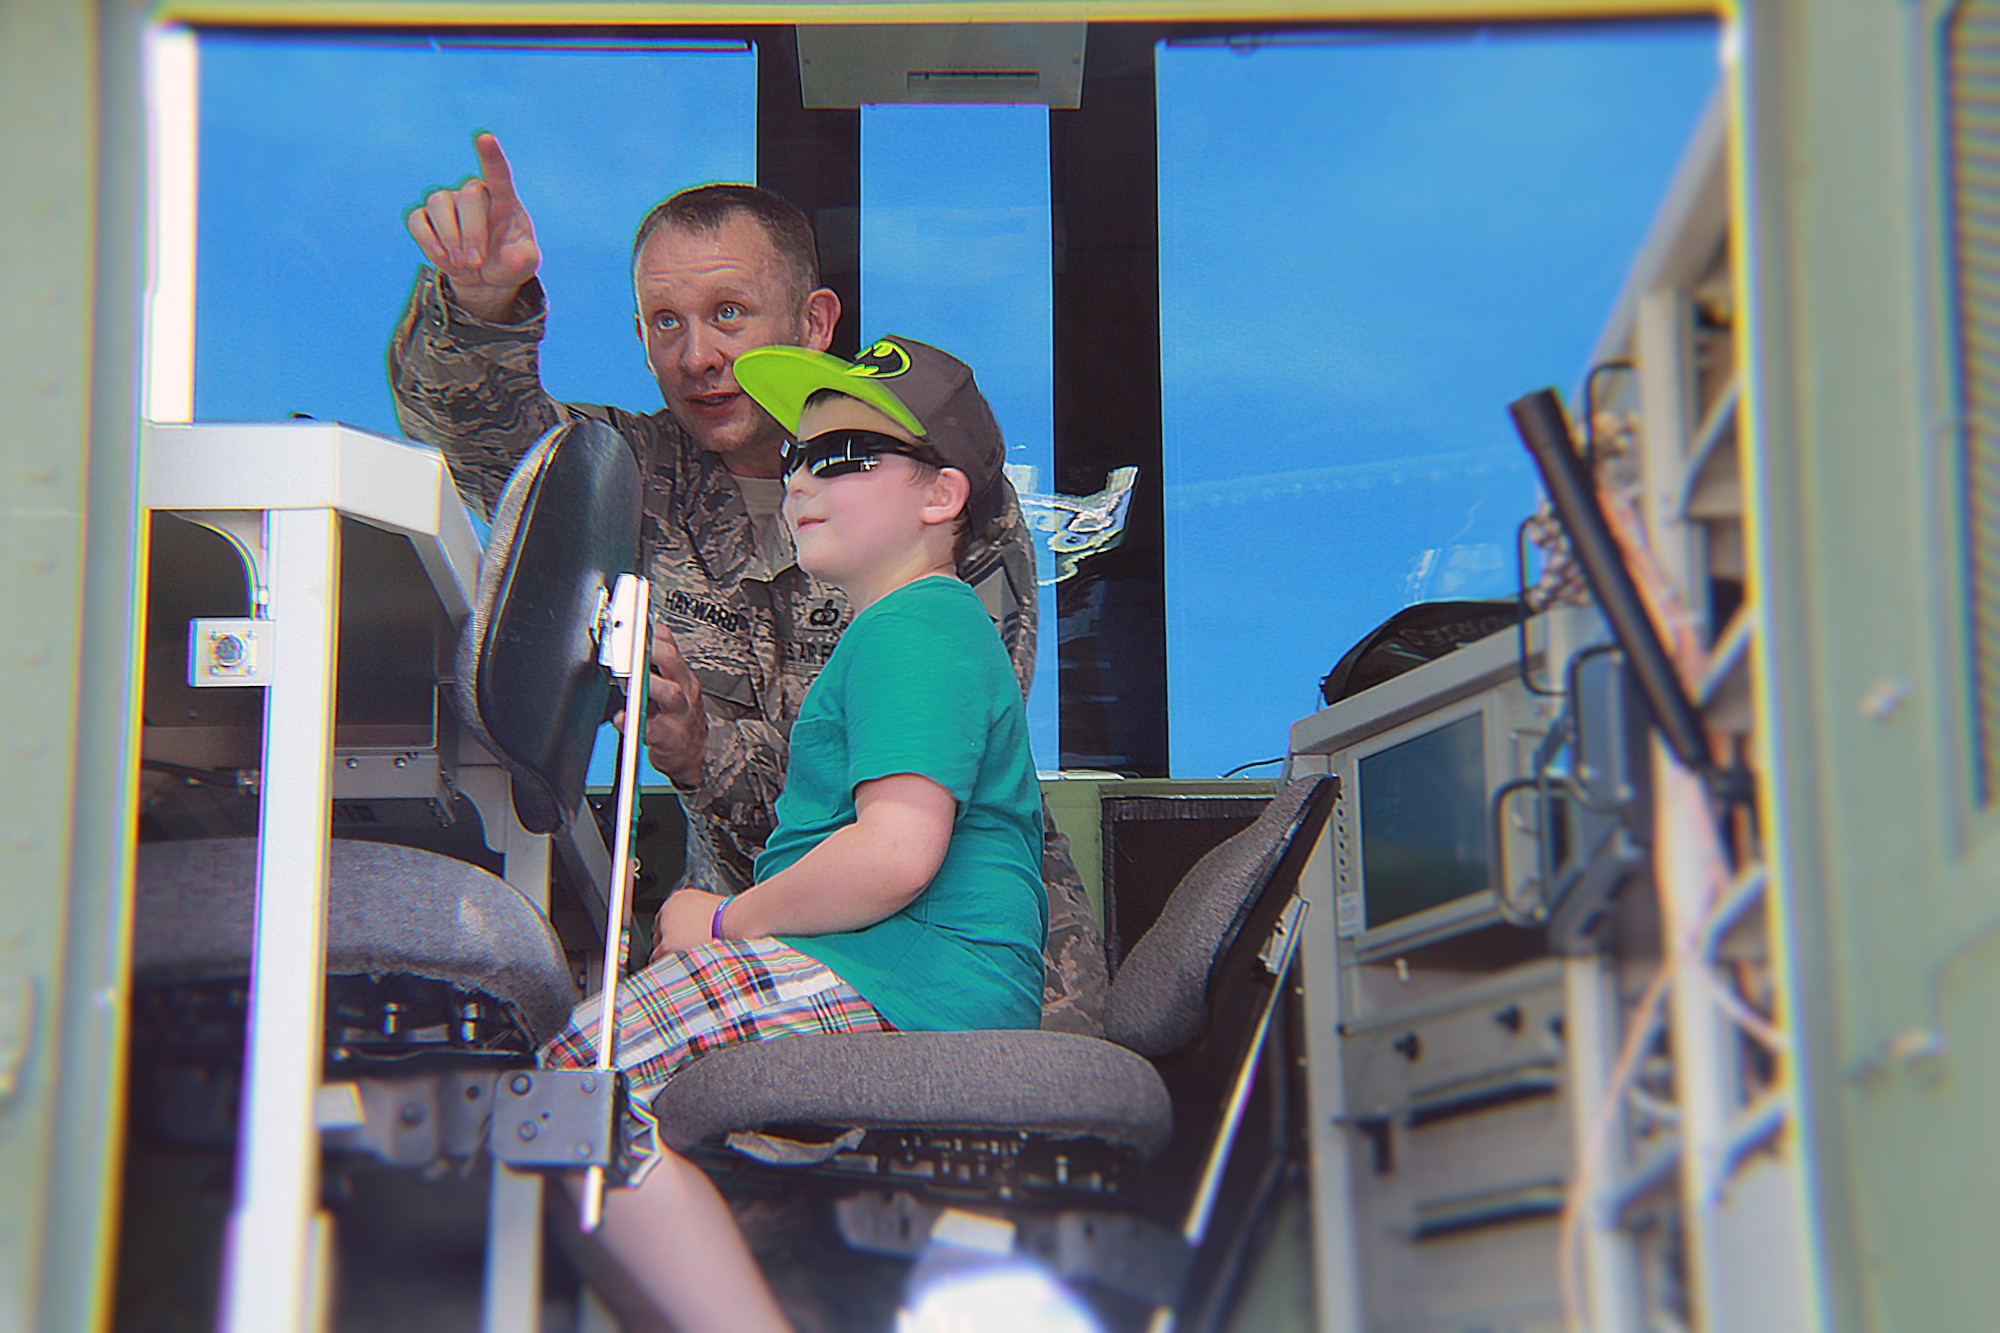 U.S. Air Force Senior Master Sgt. Mickey Hayward of the 260th Air Traffic Control Squadron gives a tour of the MSN-7 Mobile Control Tower to Andrew Schreiter of Lebanon, Maine at the Wings and Wheels community event in Rochester, N.H. June 4, 2016. The Airmen greeted and spoke with community members and families attending the event, and showed them how MSN-7 can be used for more than just military purposes. (U.S. Air National Guard photo by Staff Sgt. Kayla Rorick)